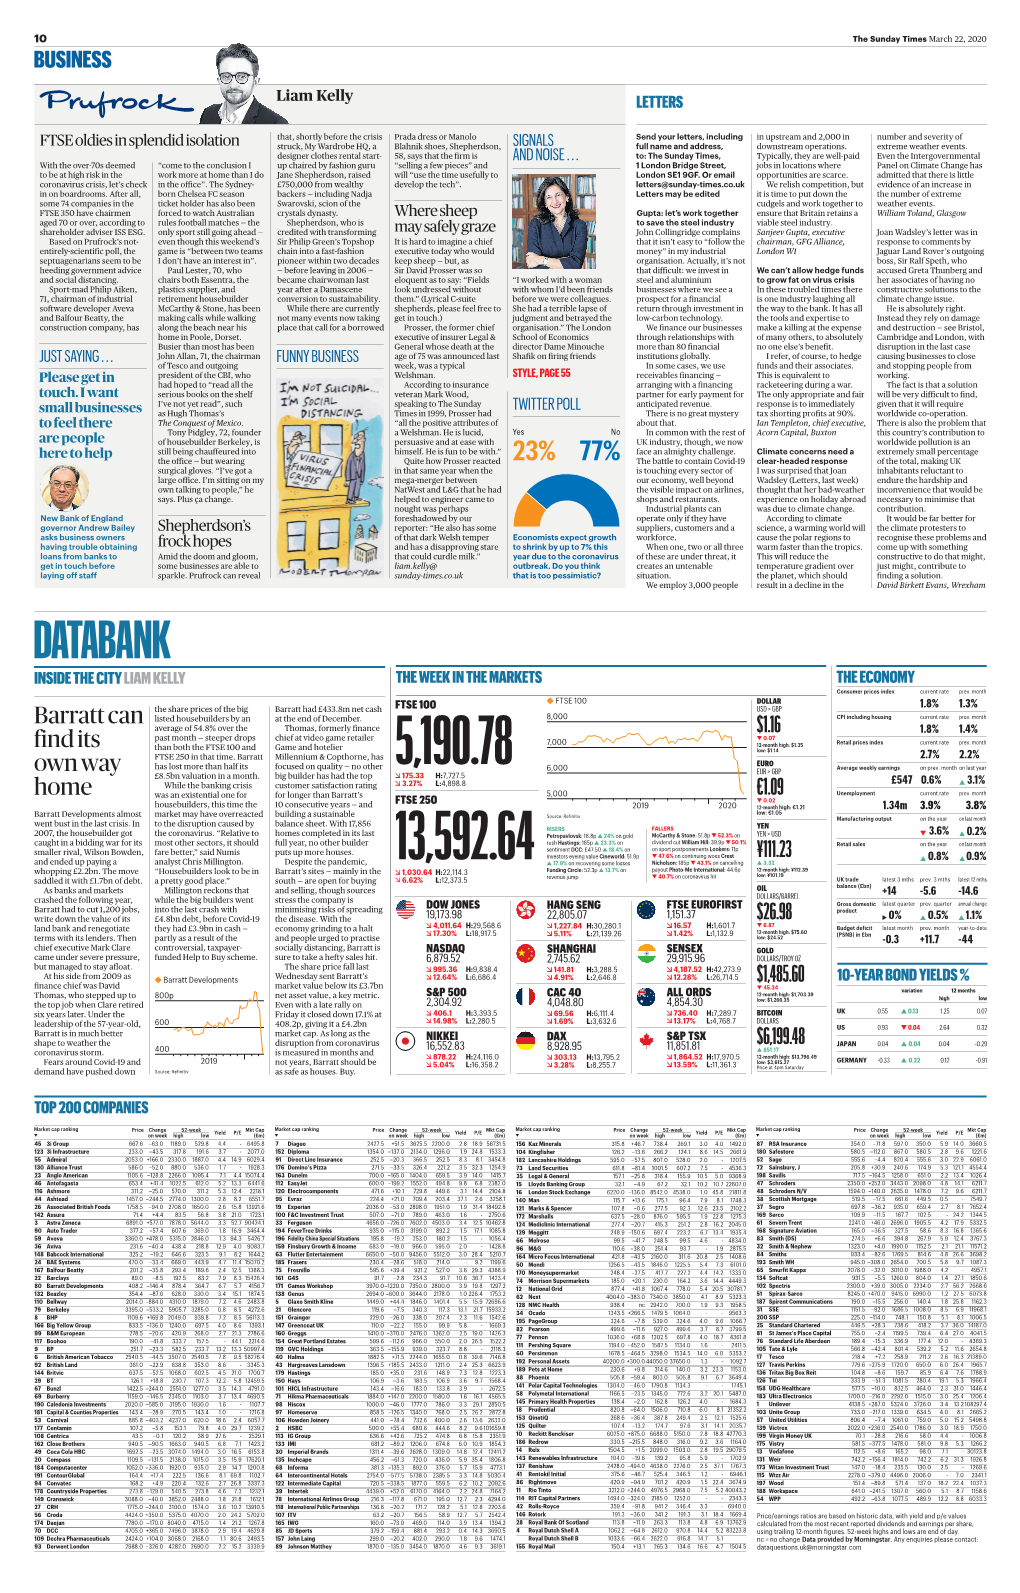 DATABANK INSIDE the CITY LIAM KELLY the WEEK in the MARKETS the ECONOMY Consumer Prices Index Current Rate Prev